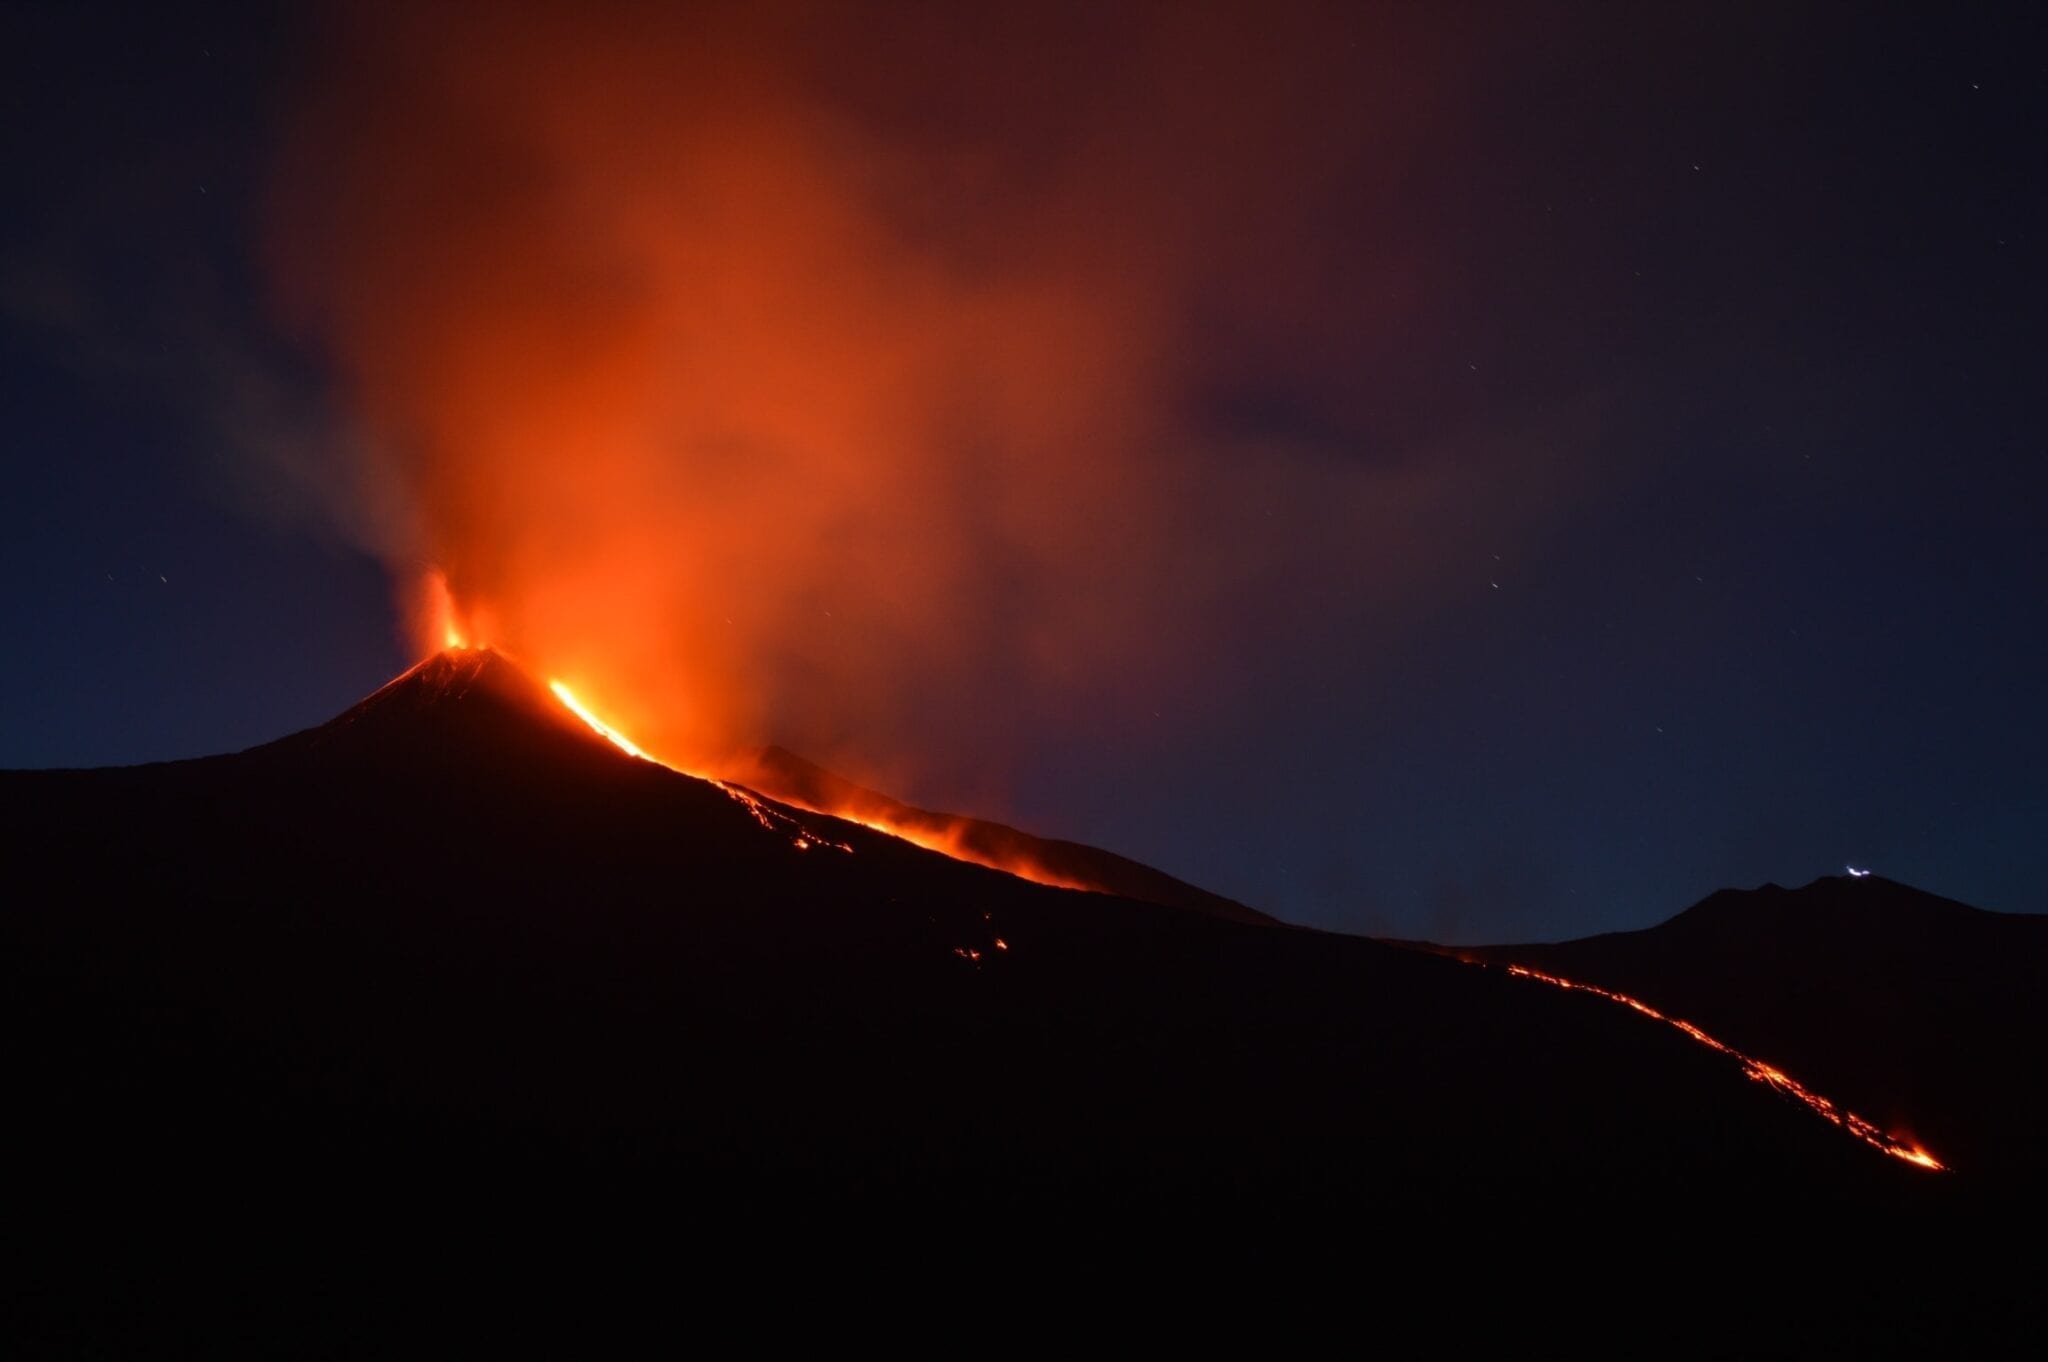 Mount Etna, by Shawn Appel - Unsplash. Volcano erupting in Sicily, Italy